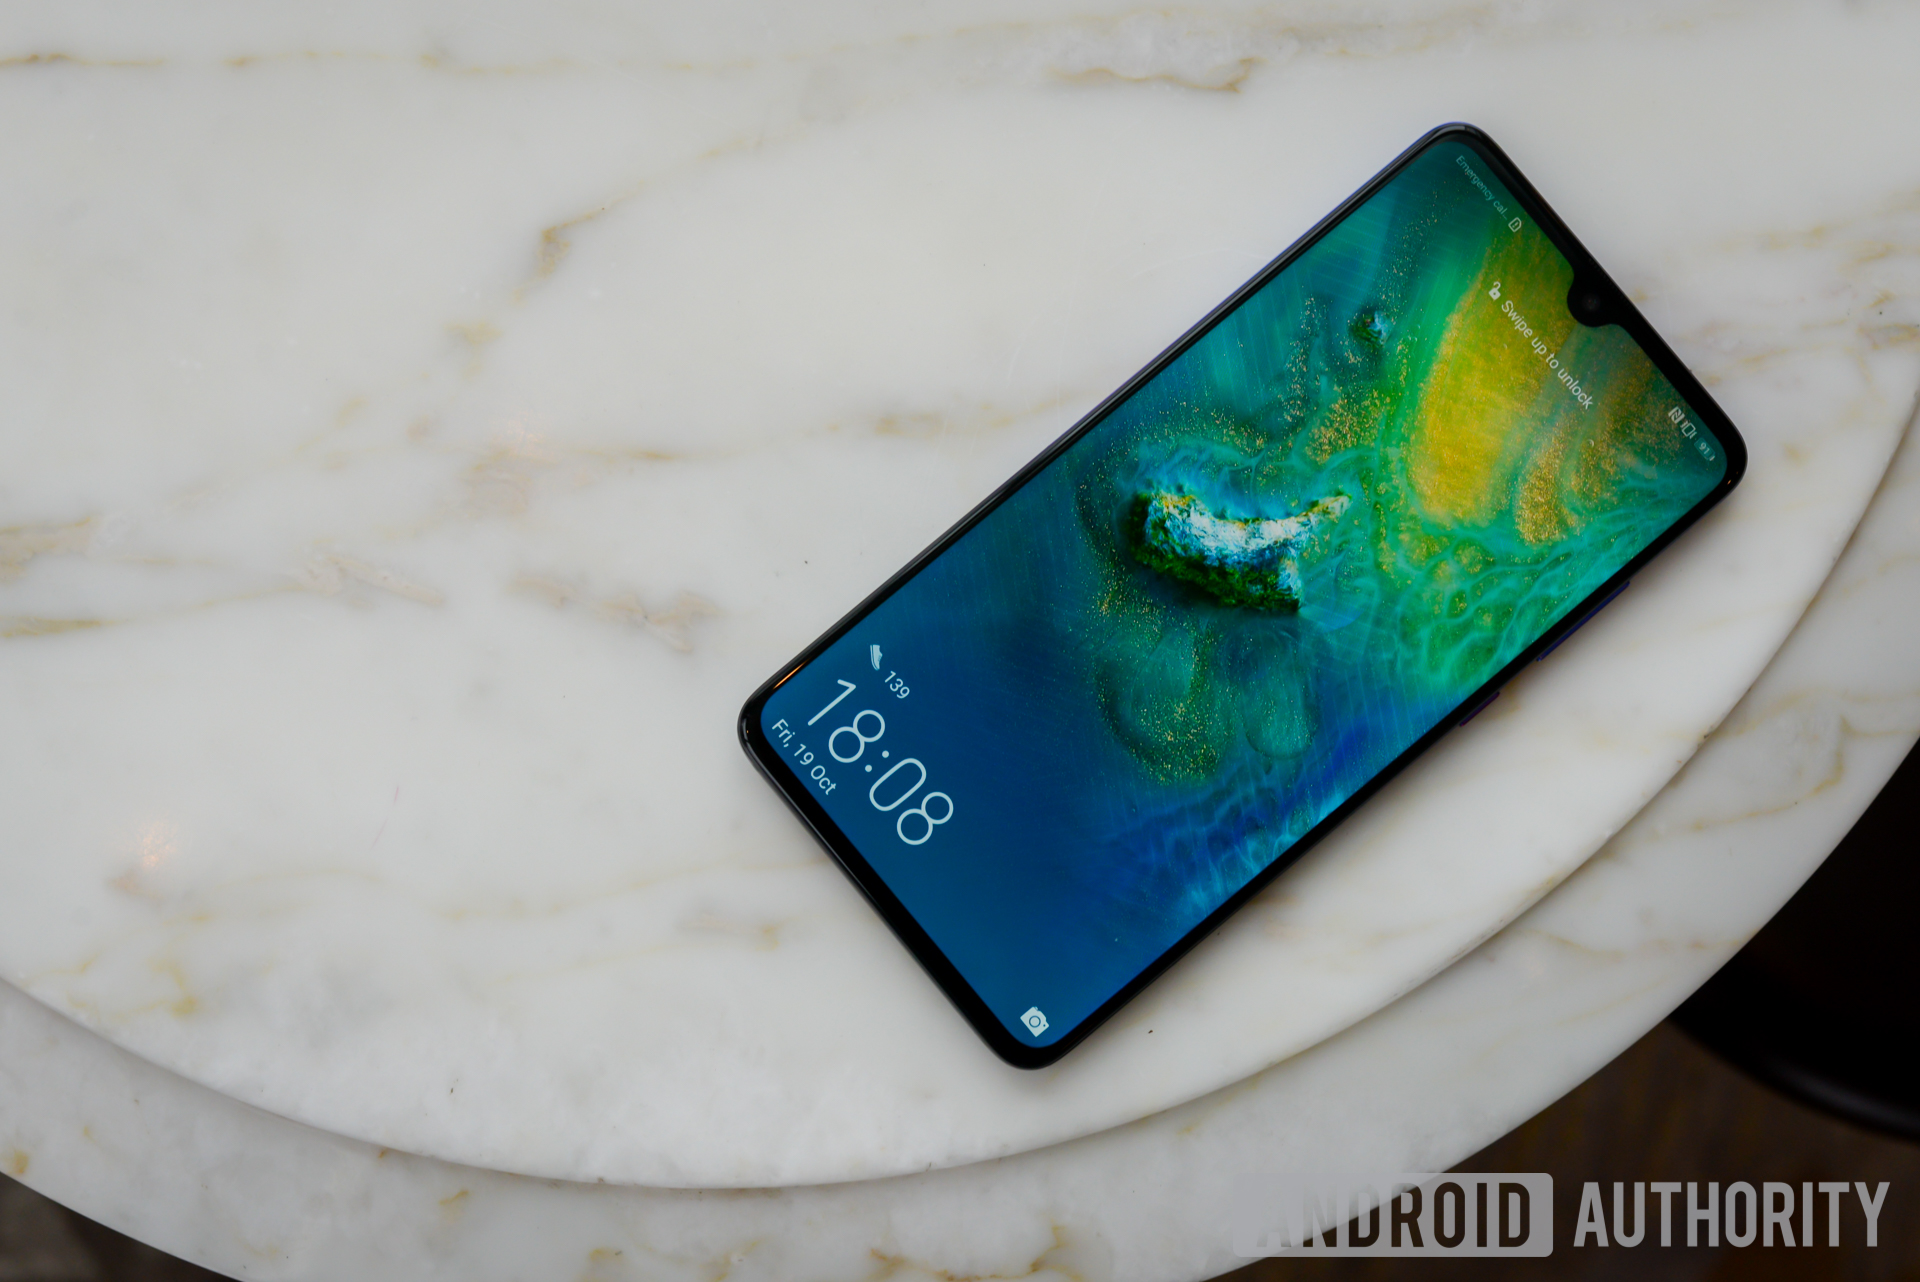 HUAWEI Mate 20 Pro and HUAWEI Mate 20: Specs, release date, price